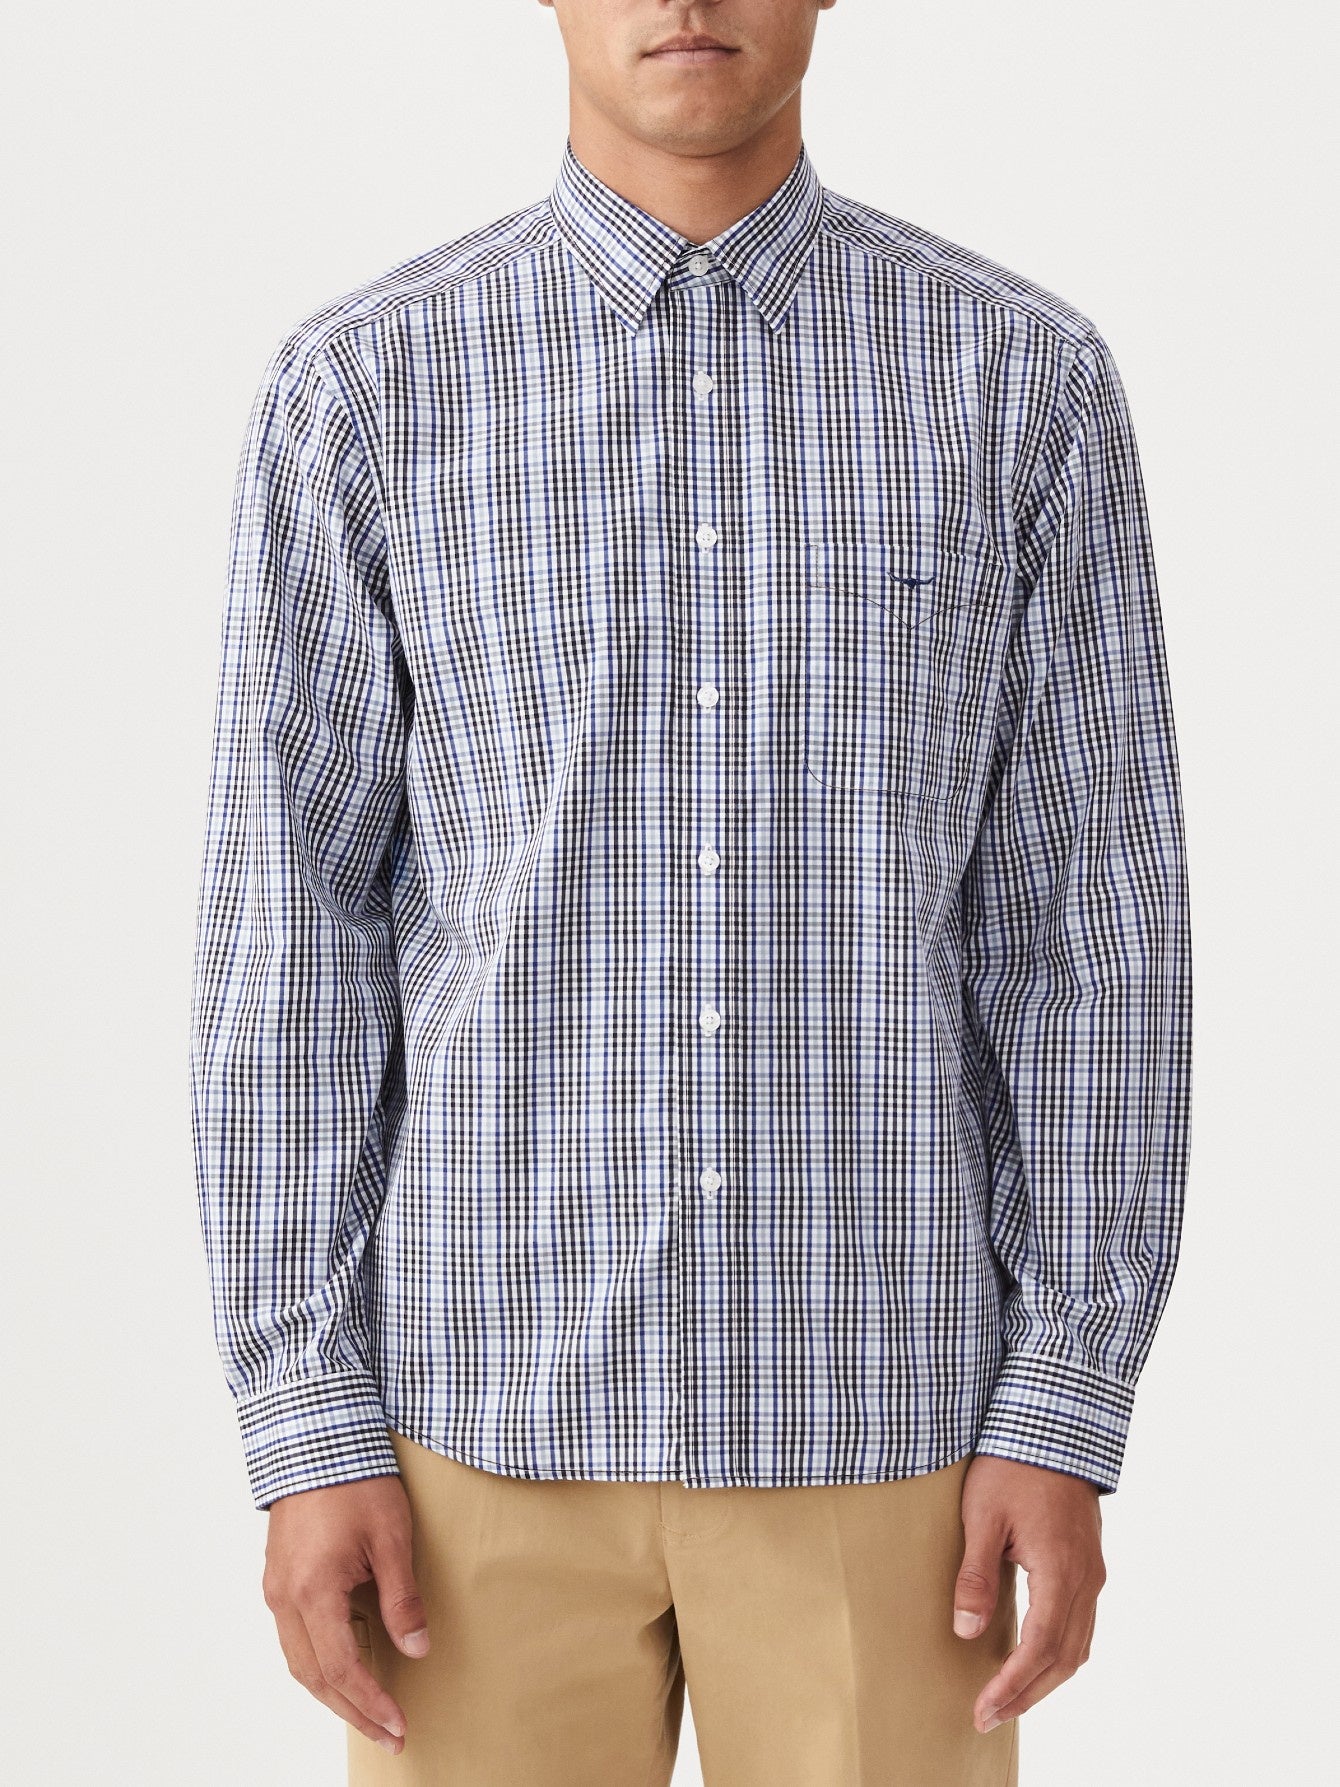 RM Williams S24 Collins Shirt PS